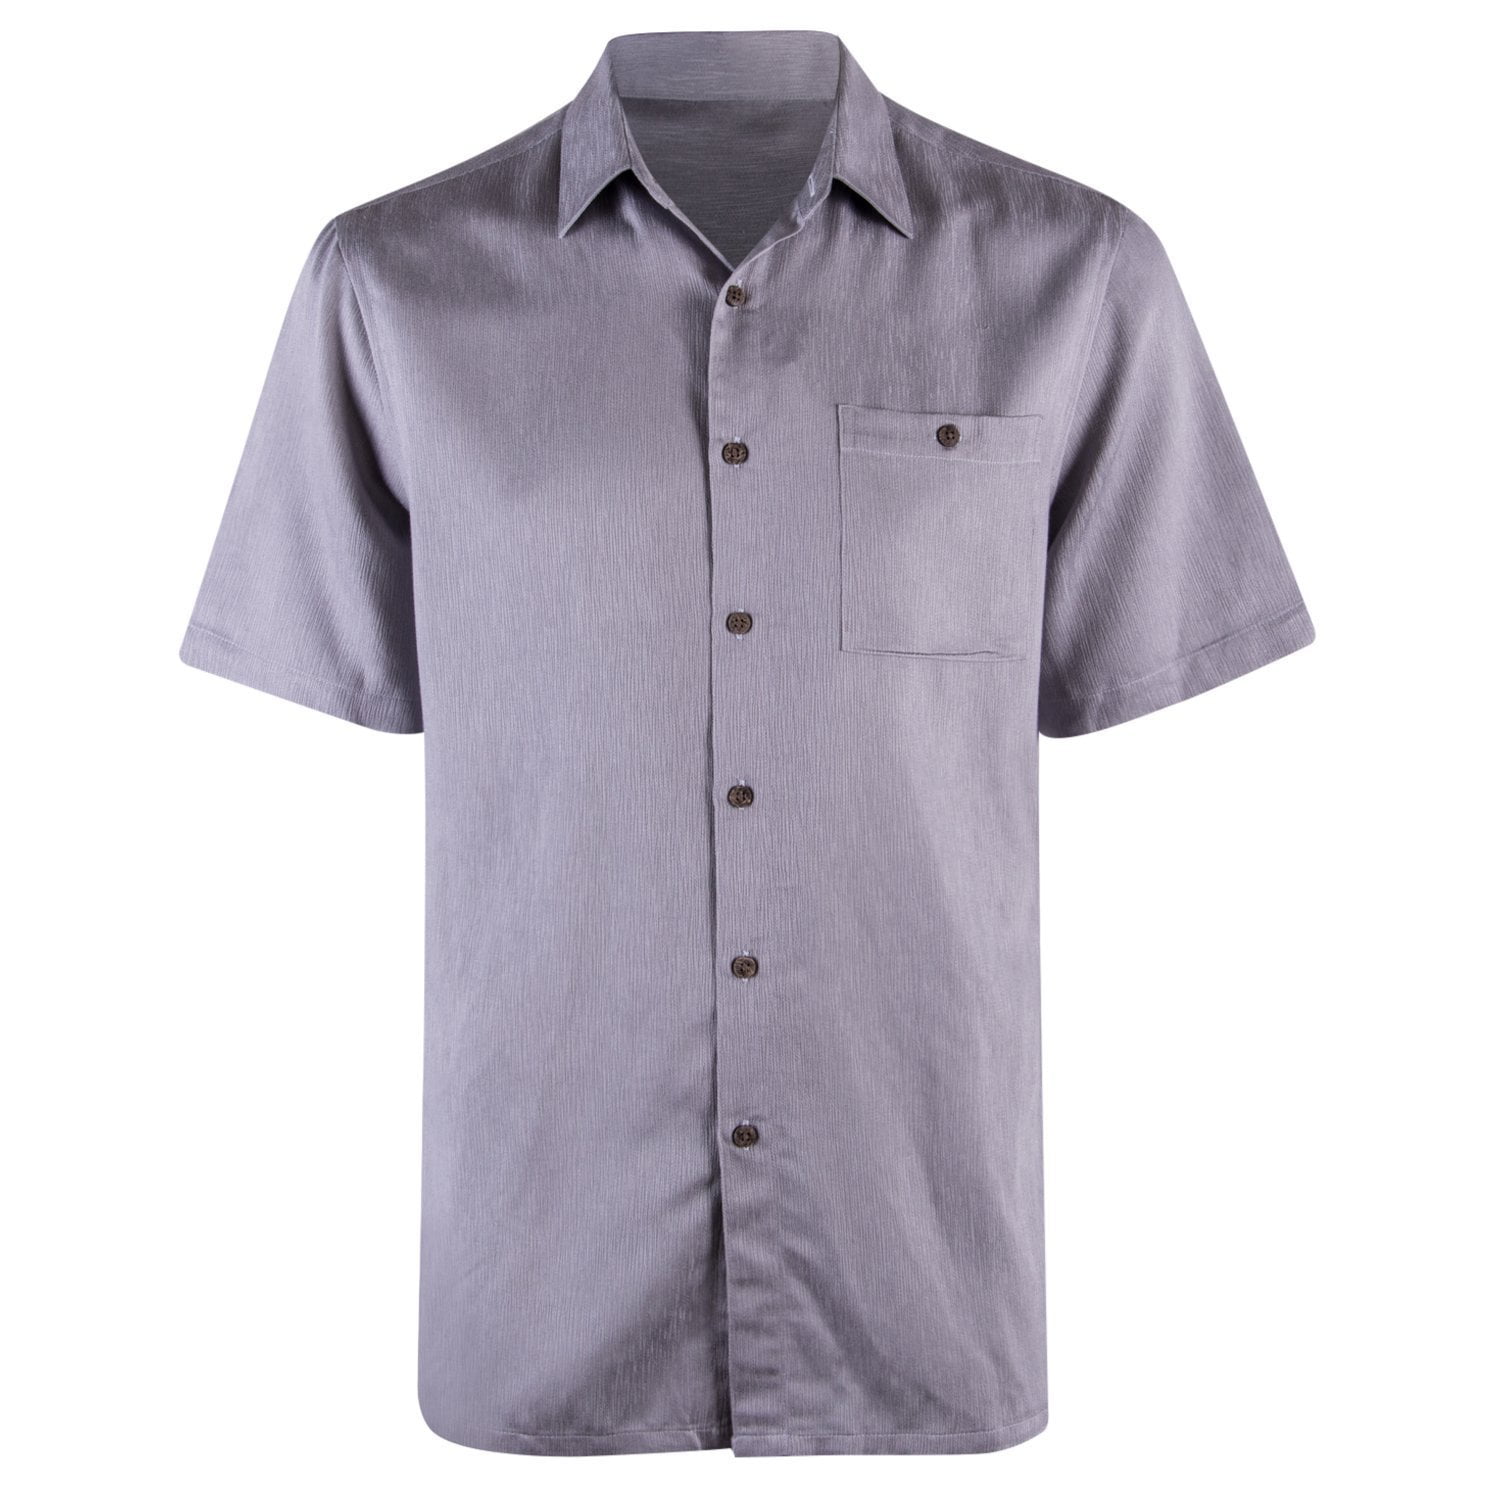 Campia Mens Textured Solid Crepe Weave Shirt (Grey, XXL) Short Sleeve ...